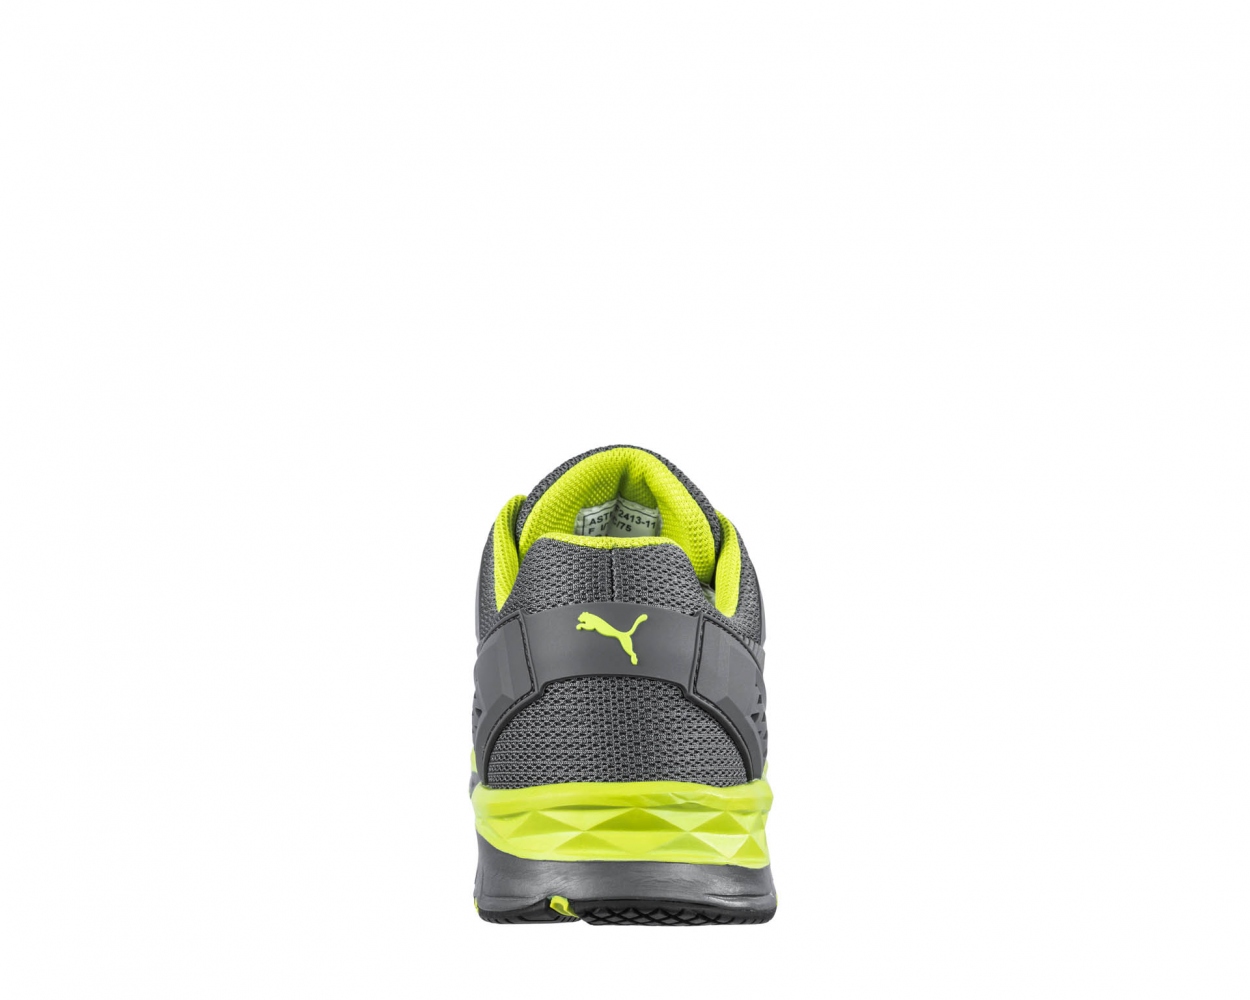 pics/Albatros/Safety Shoes/643880/puma-643880-fuse-motion-2-green-low-809-back.jpg